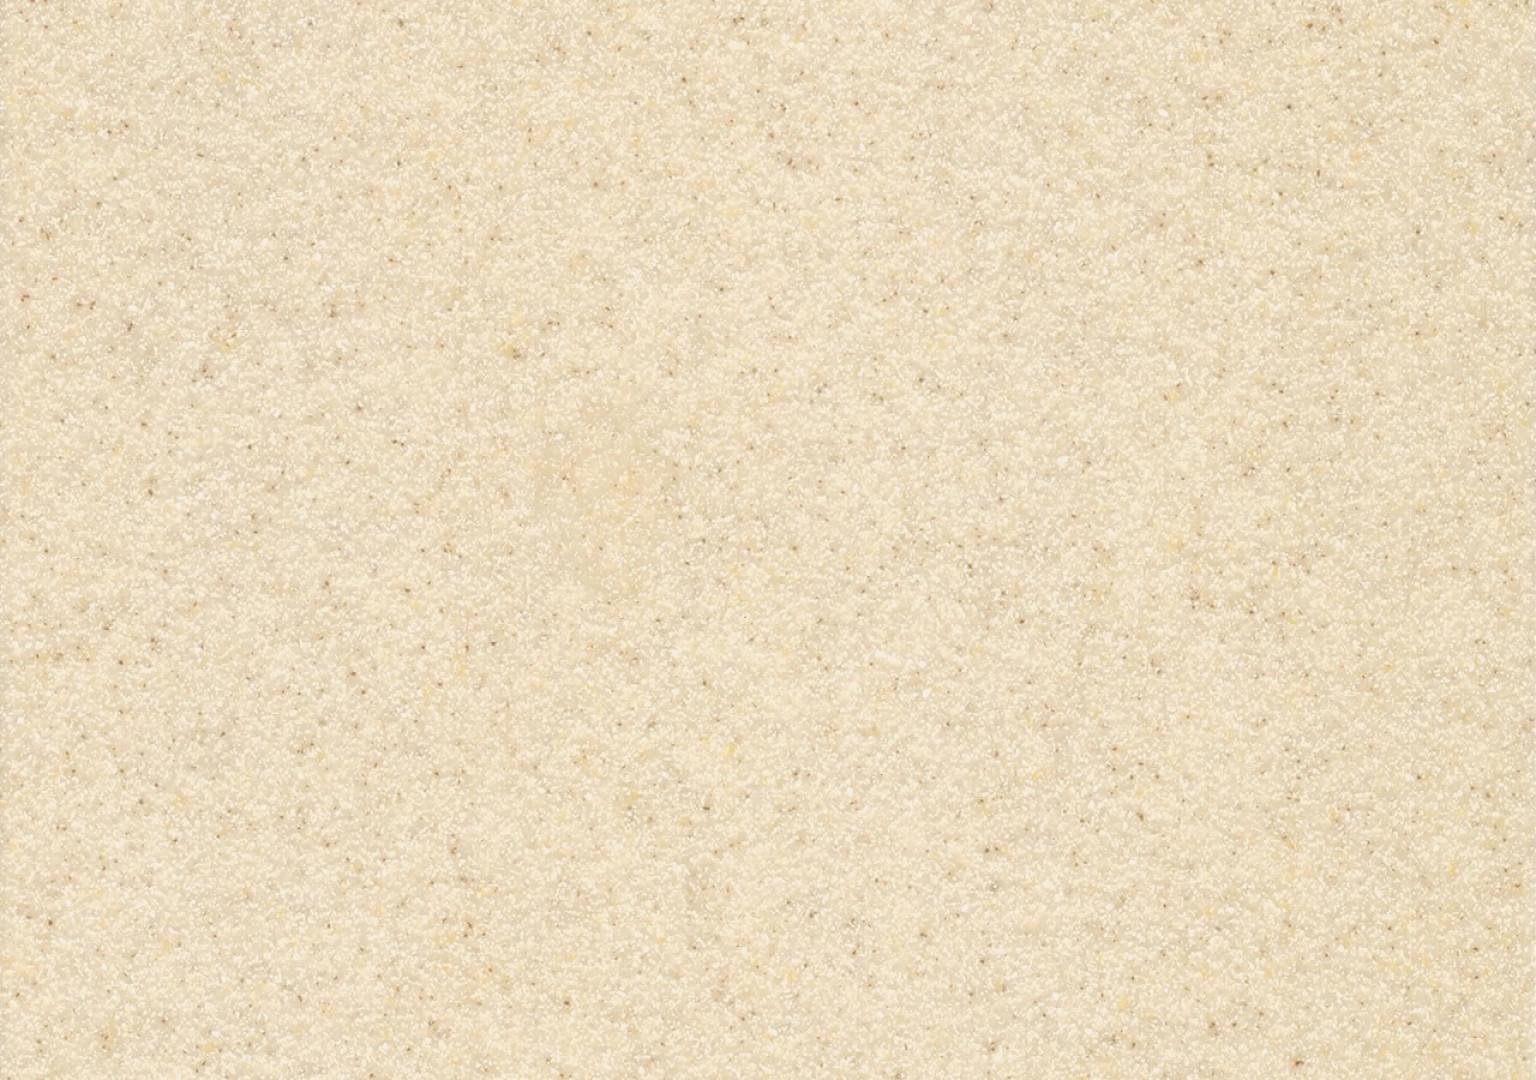 G048 Beach Sand from Luxx Newhouse Group / LG Hausys HI-MACS®